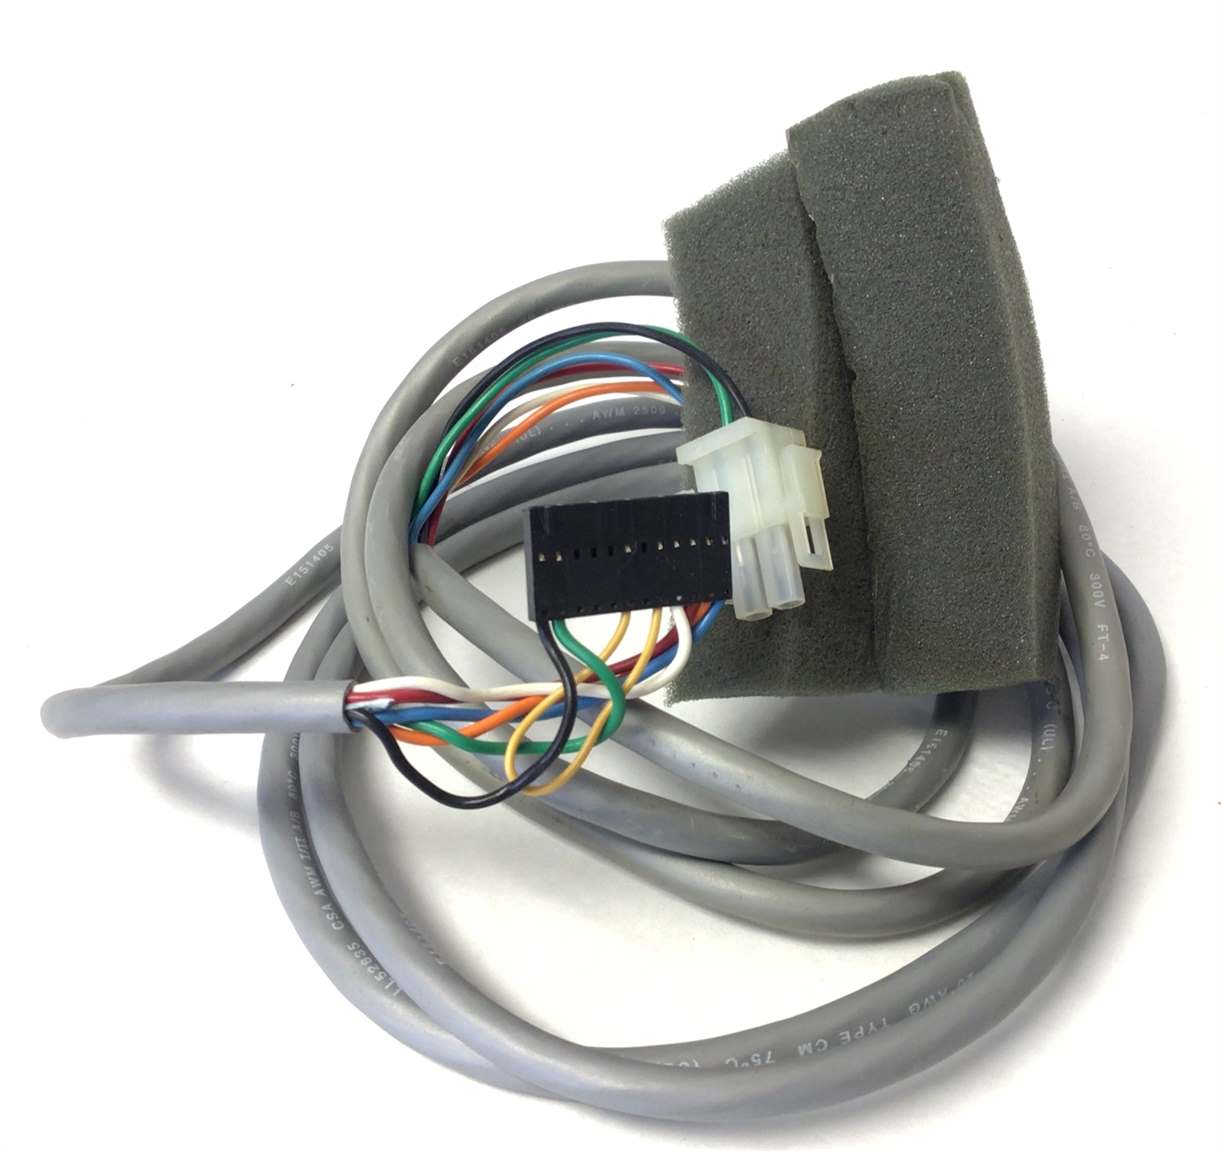 Main Wire Harness (Used)